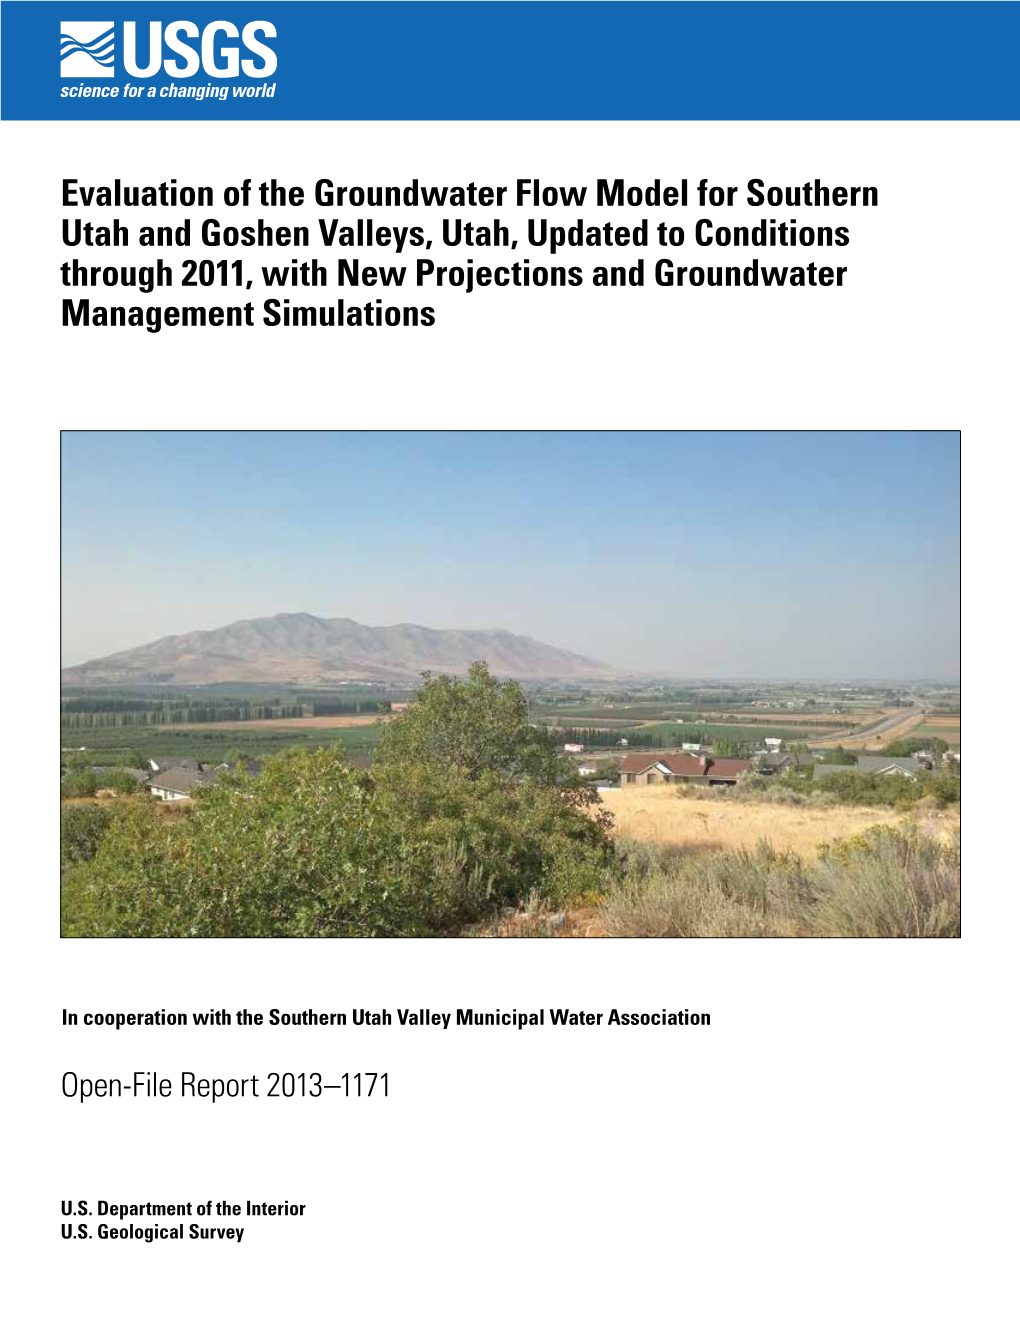 Evaluation of the Groundwater Flow Model for Southern Utah And